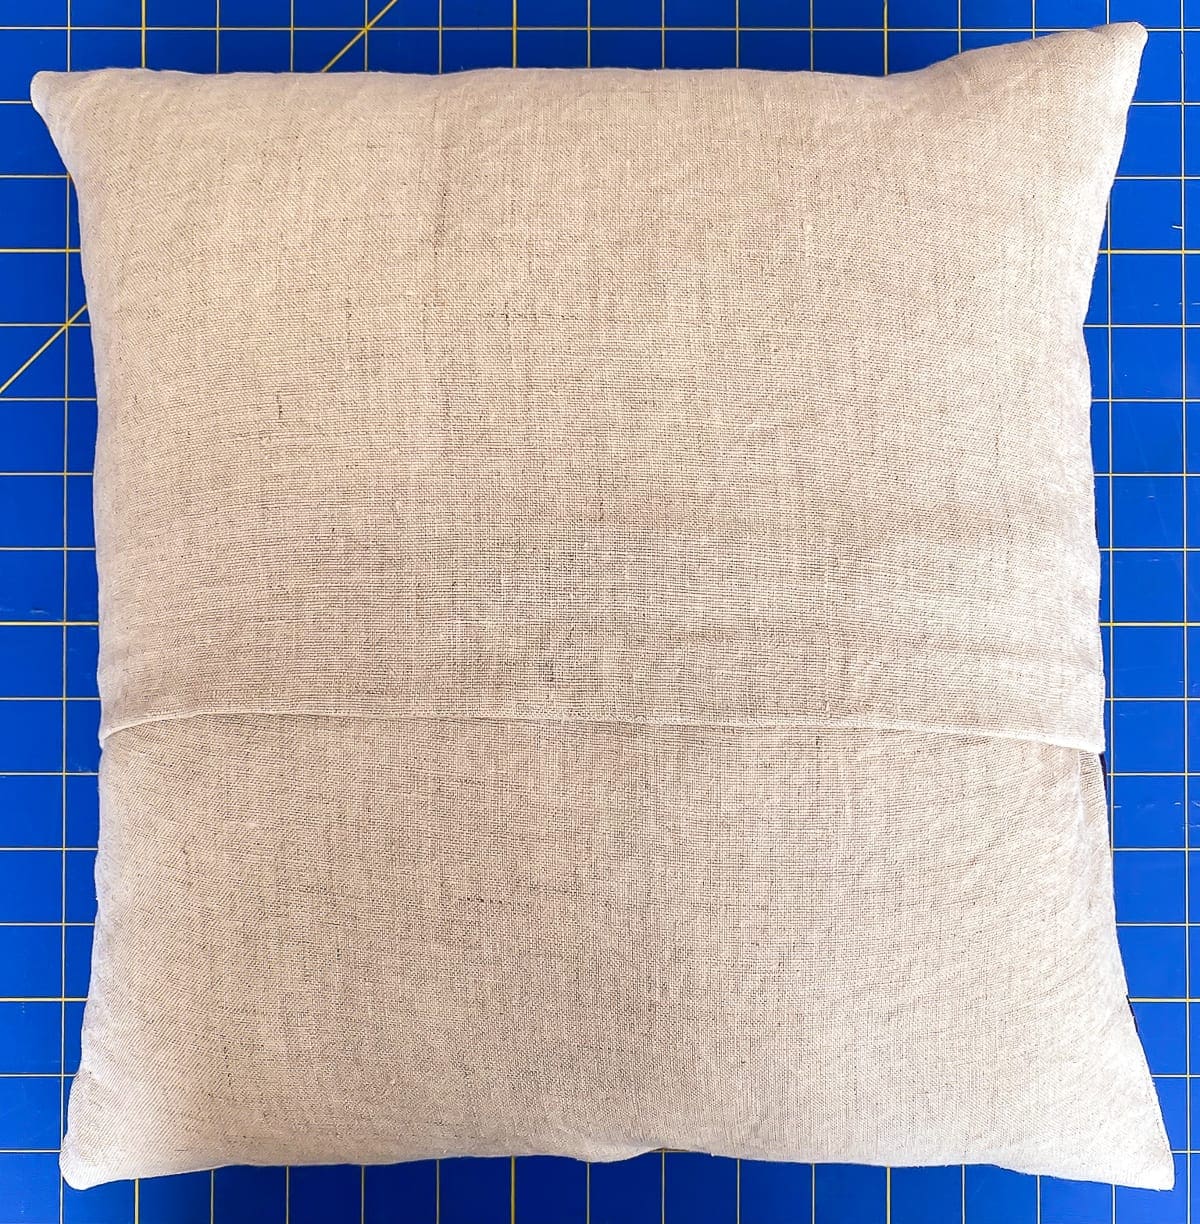 How to Stuff a Pillow Cover